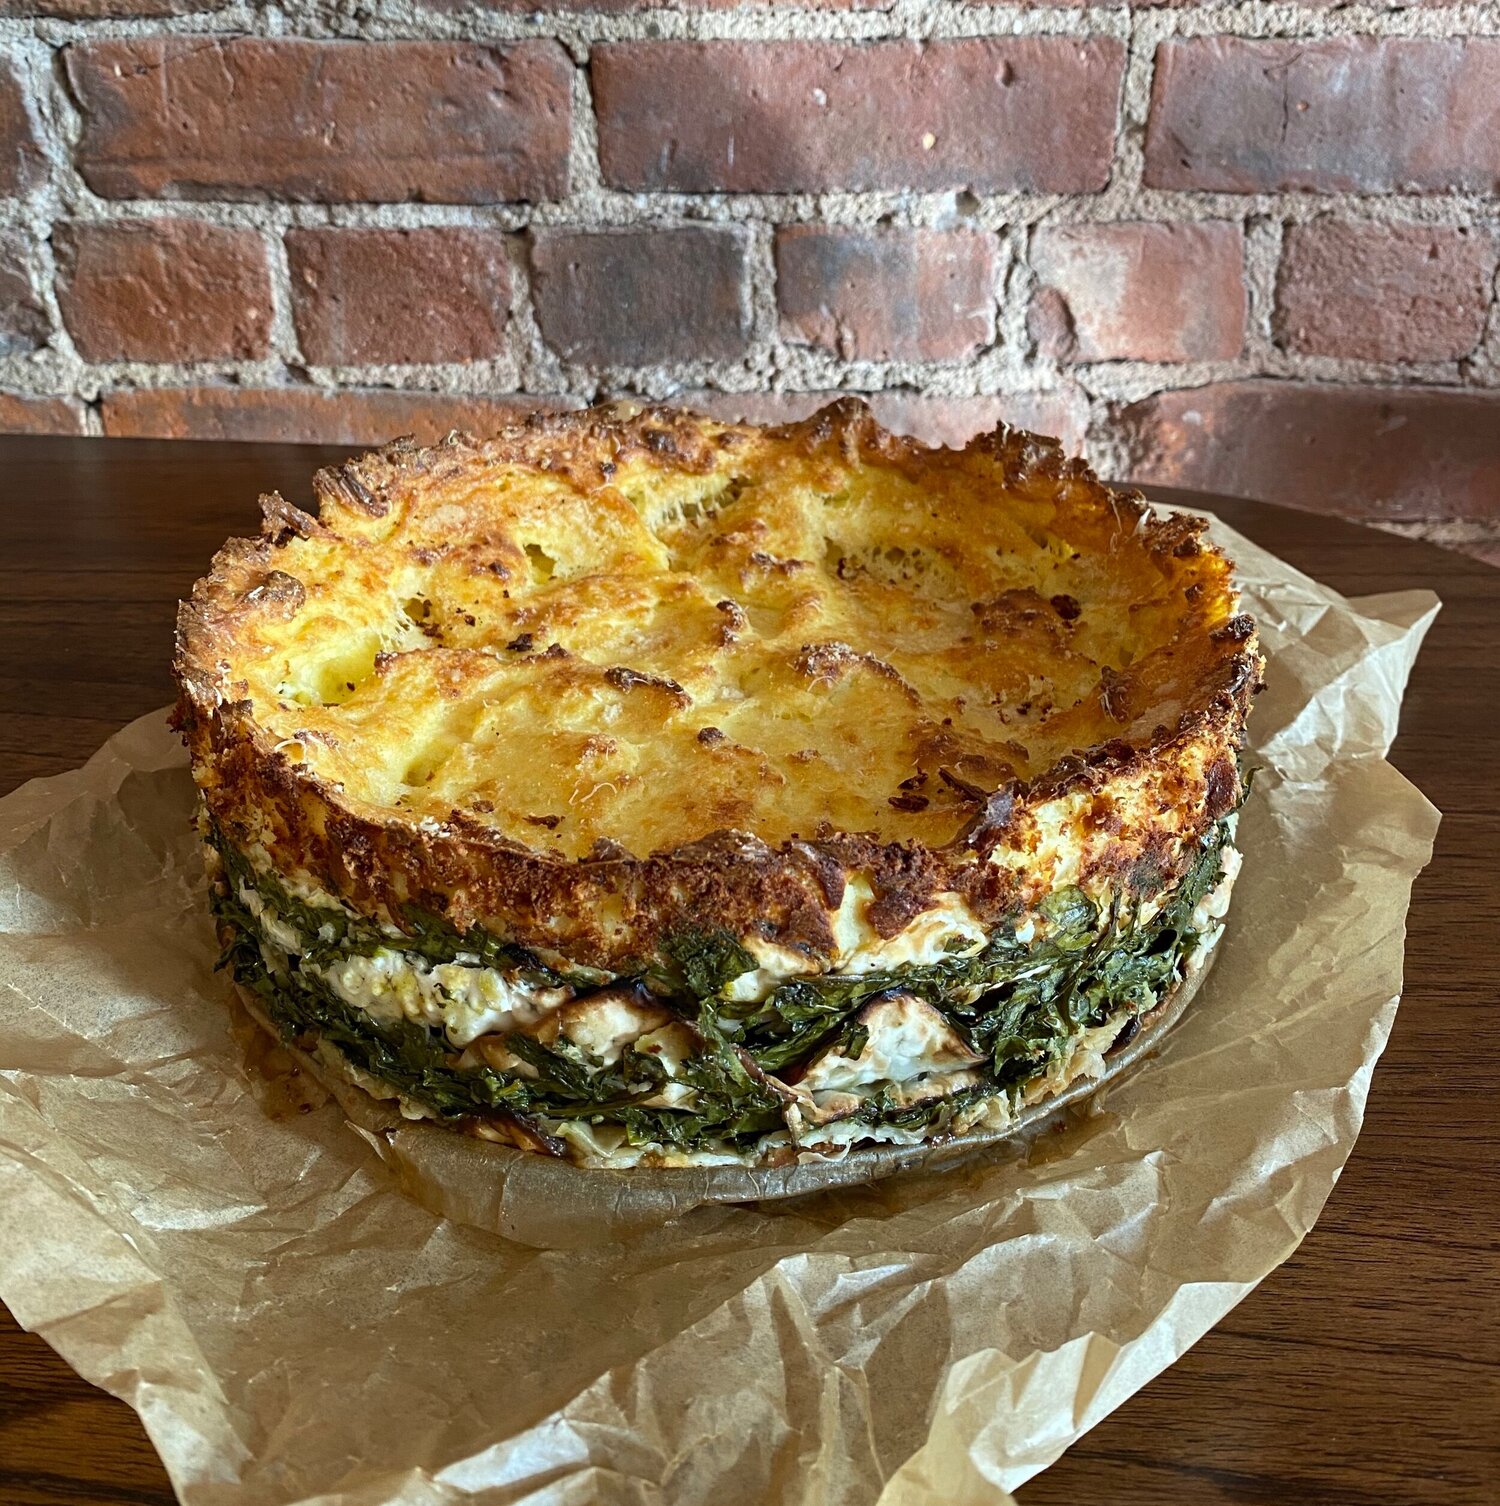 Sephardic mina with layers of potato, spinach, and cheese